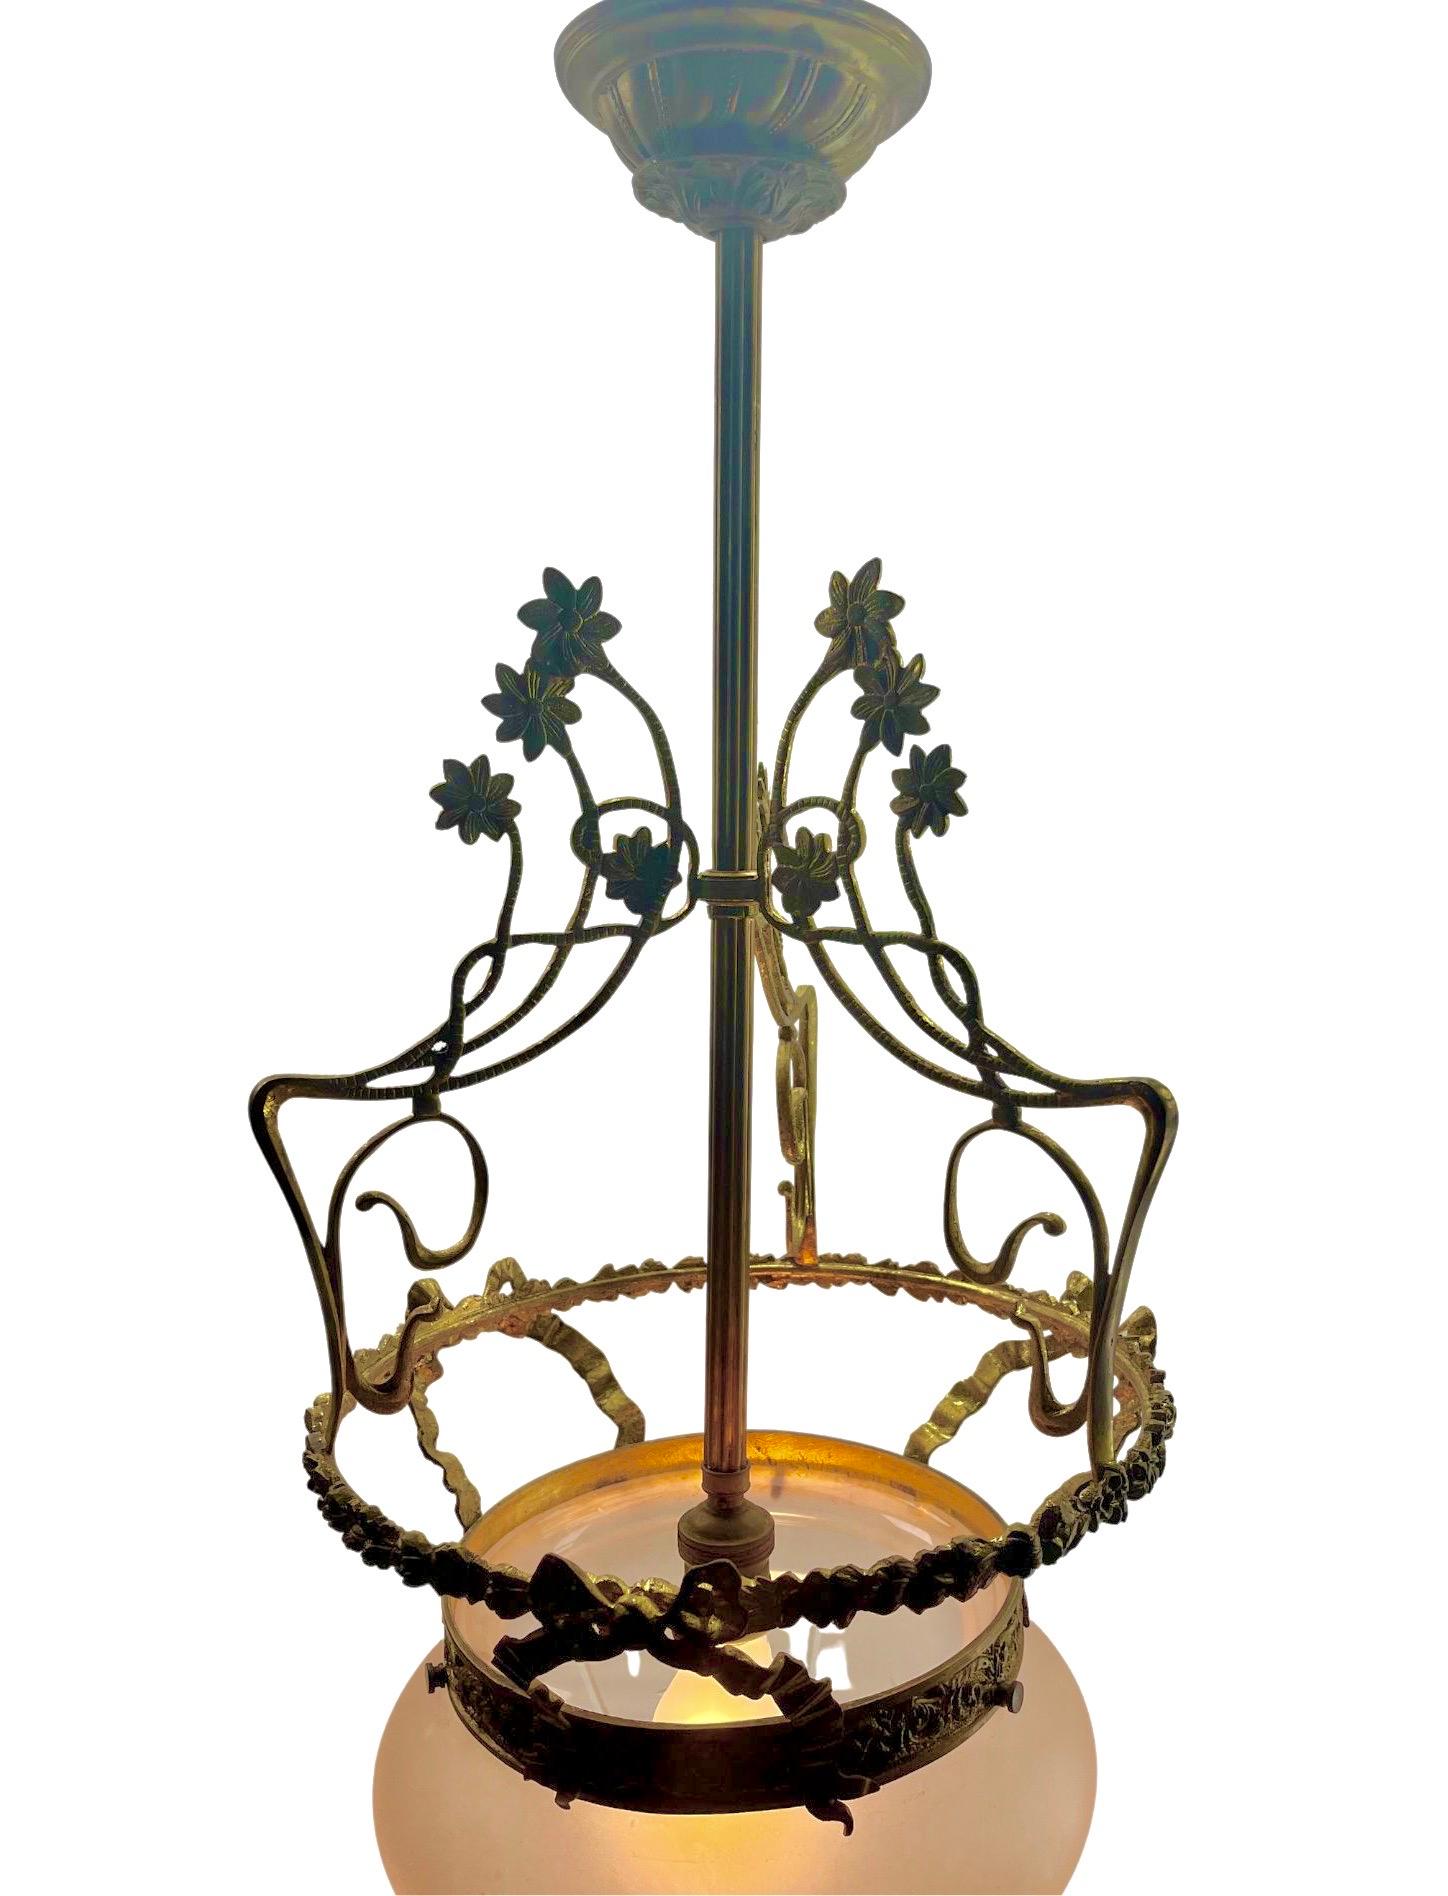 Faceted Art Nouveau Solid Brass Chandelier With Floral Decorations  1930s For Sale